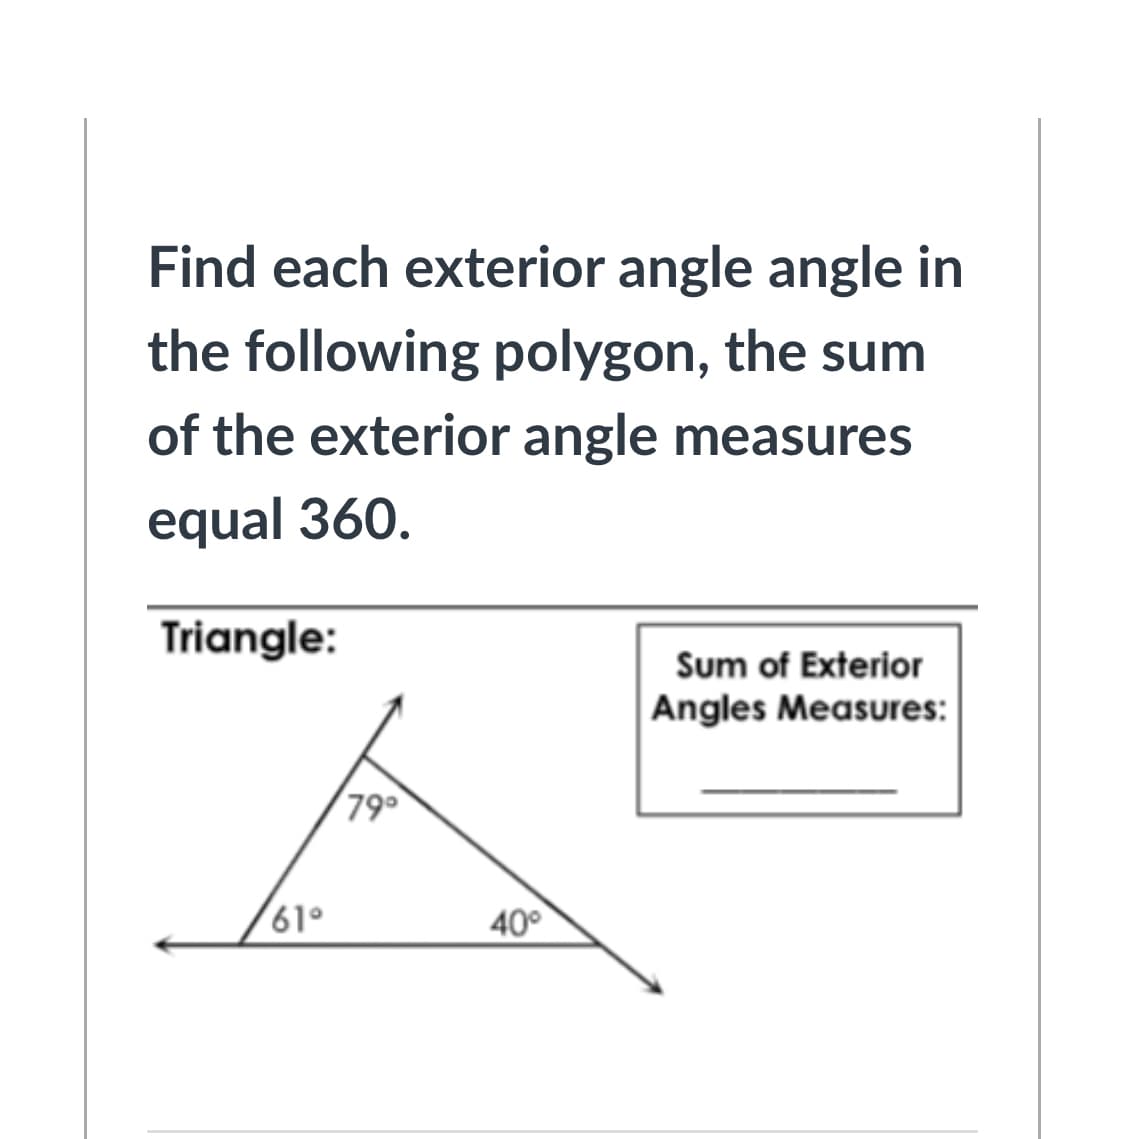 Find each exterior angle angle in
the following polygon, the sum
of the exterior angle measures
equal 360.
Triangle:
Sum of Exterior
Angles Measures:
79
61°
40°
